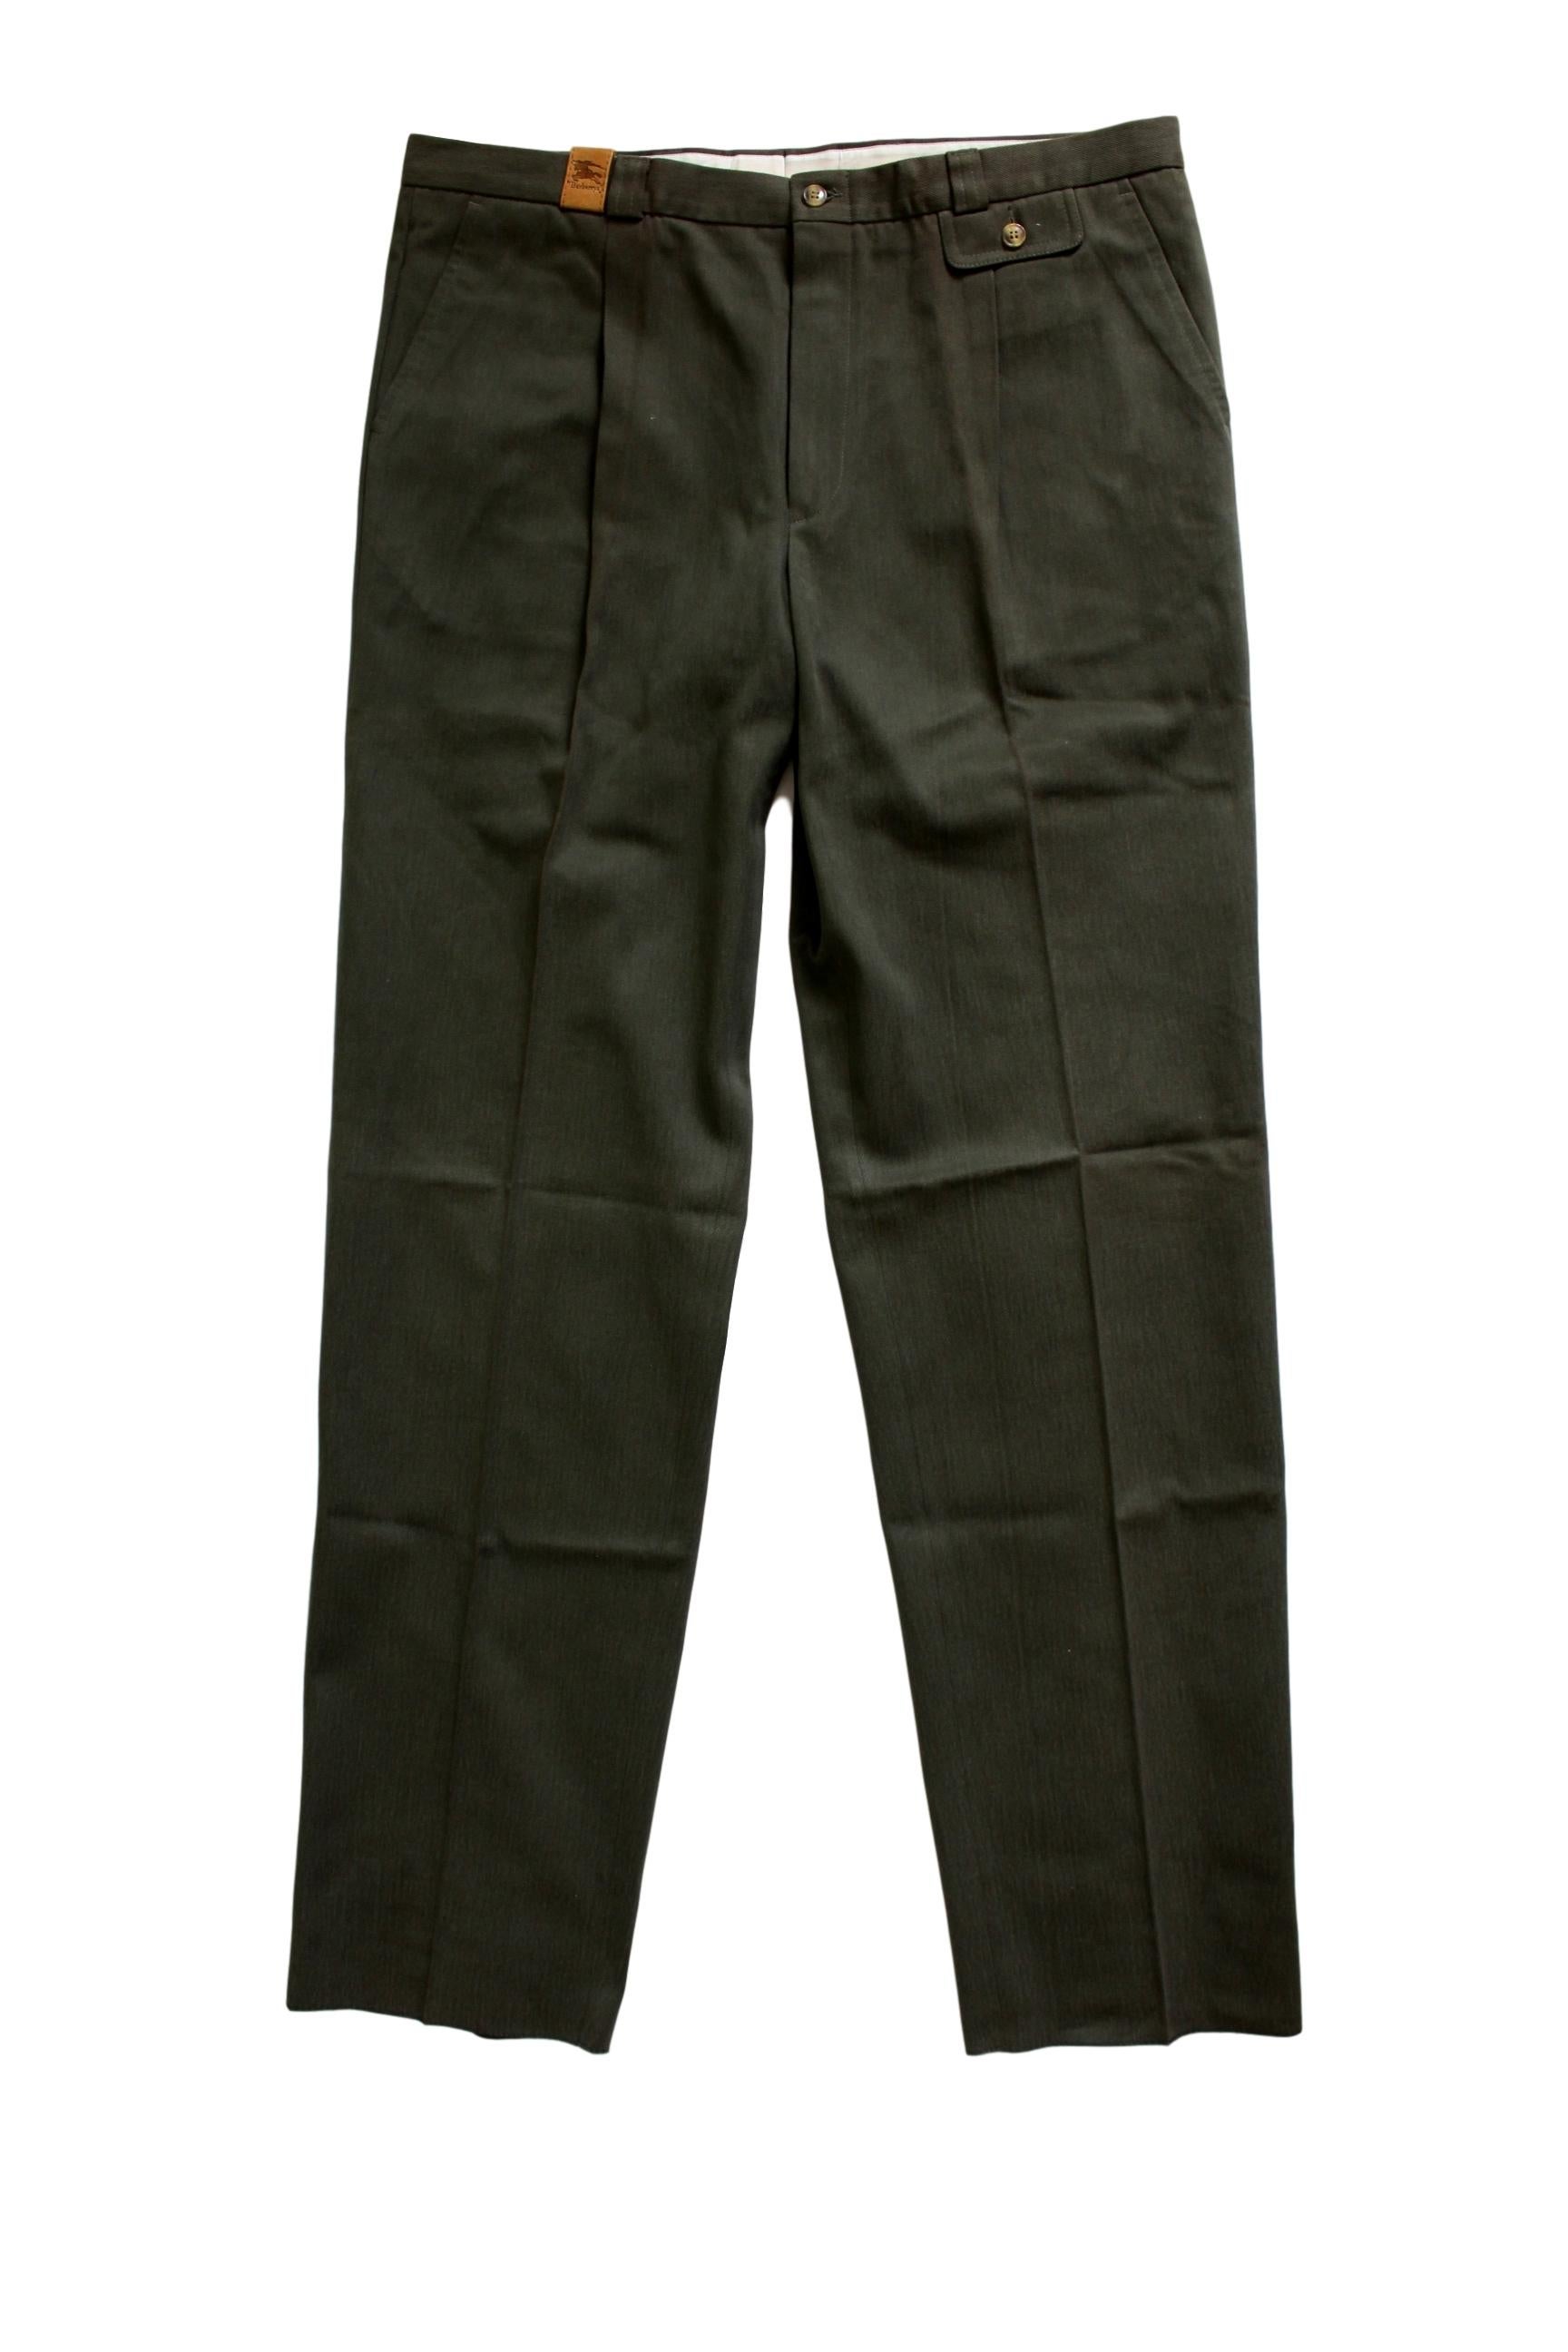 Burberry's 80s vintage men's trousers. Classic model, tailored, English cut. Light green color, 100% heavy cotton. Live hem to be adjusted according to your height. Made in Italy. New with tag, coming from stock.

Size: 58 It 48 Us 48 Uk

Waist: 50